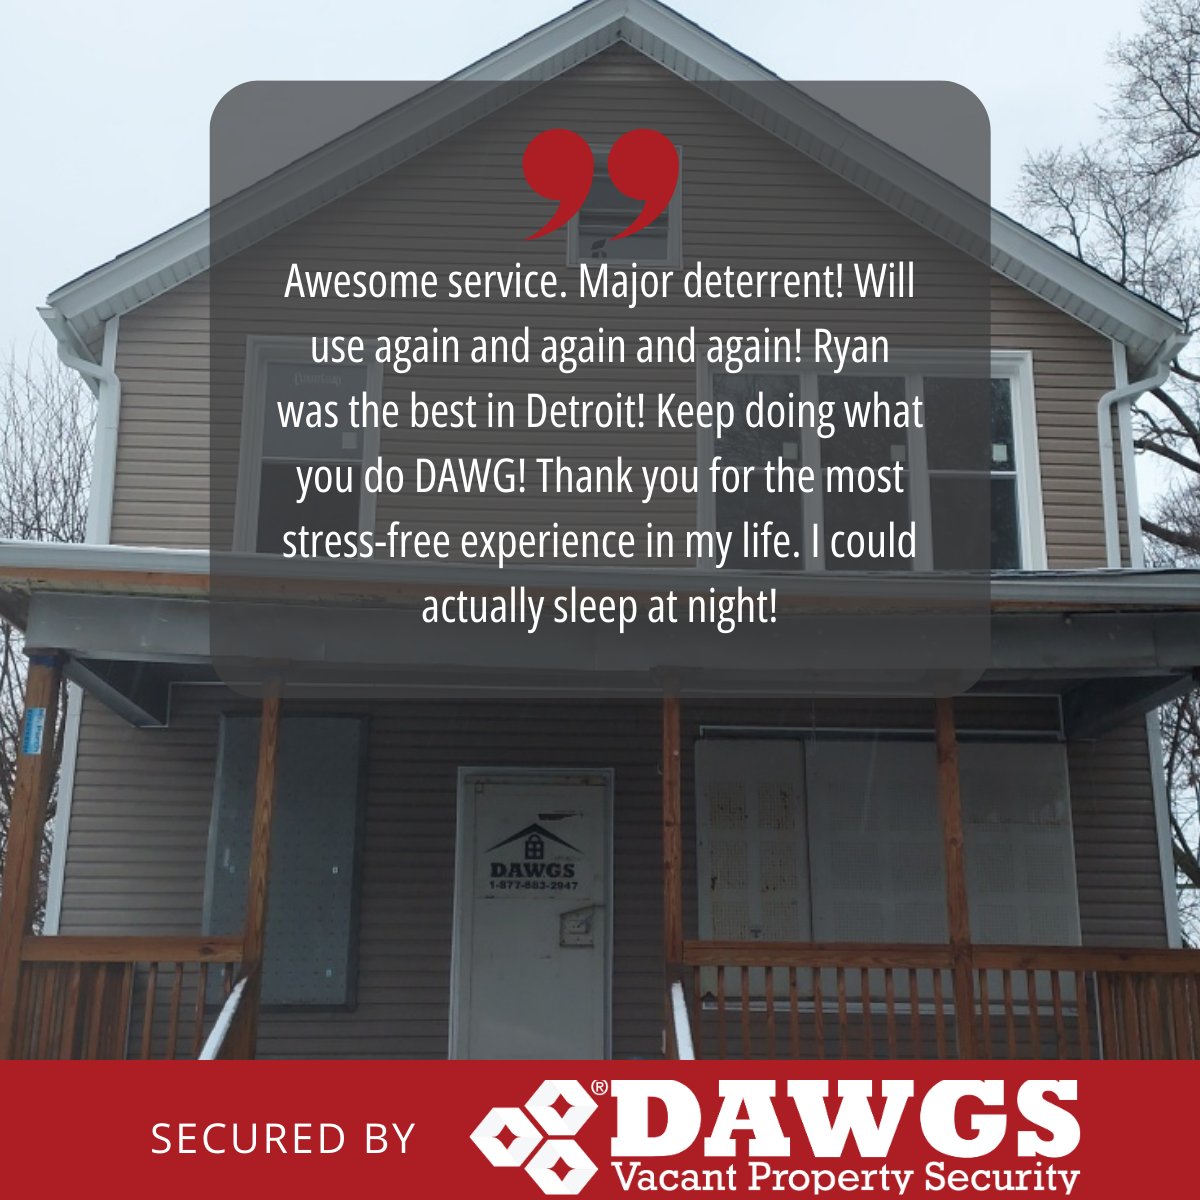 🌟 Testimonials speak volumes! Hear what our clients have to say about the peace of mind DAWGS provides.😊At DAWGS, we're committed to providing top-notch service. Trust us to keep your property secure. 💼 #HappyCustomers #VacantProperty